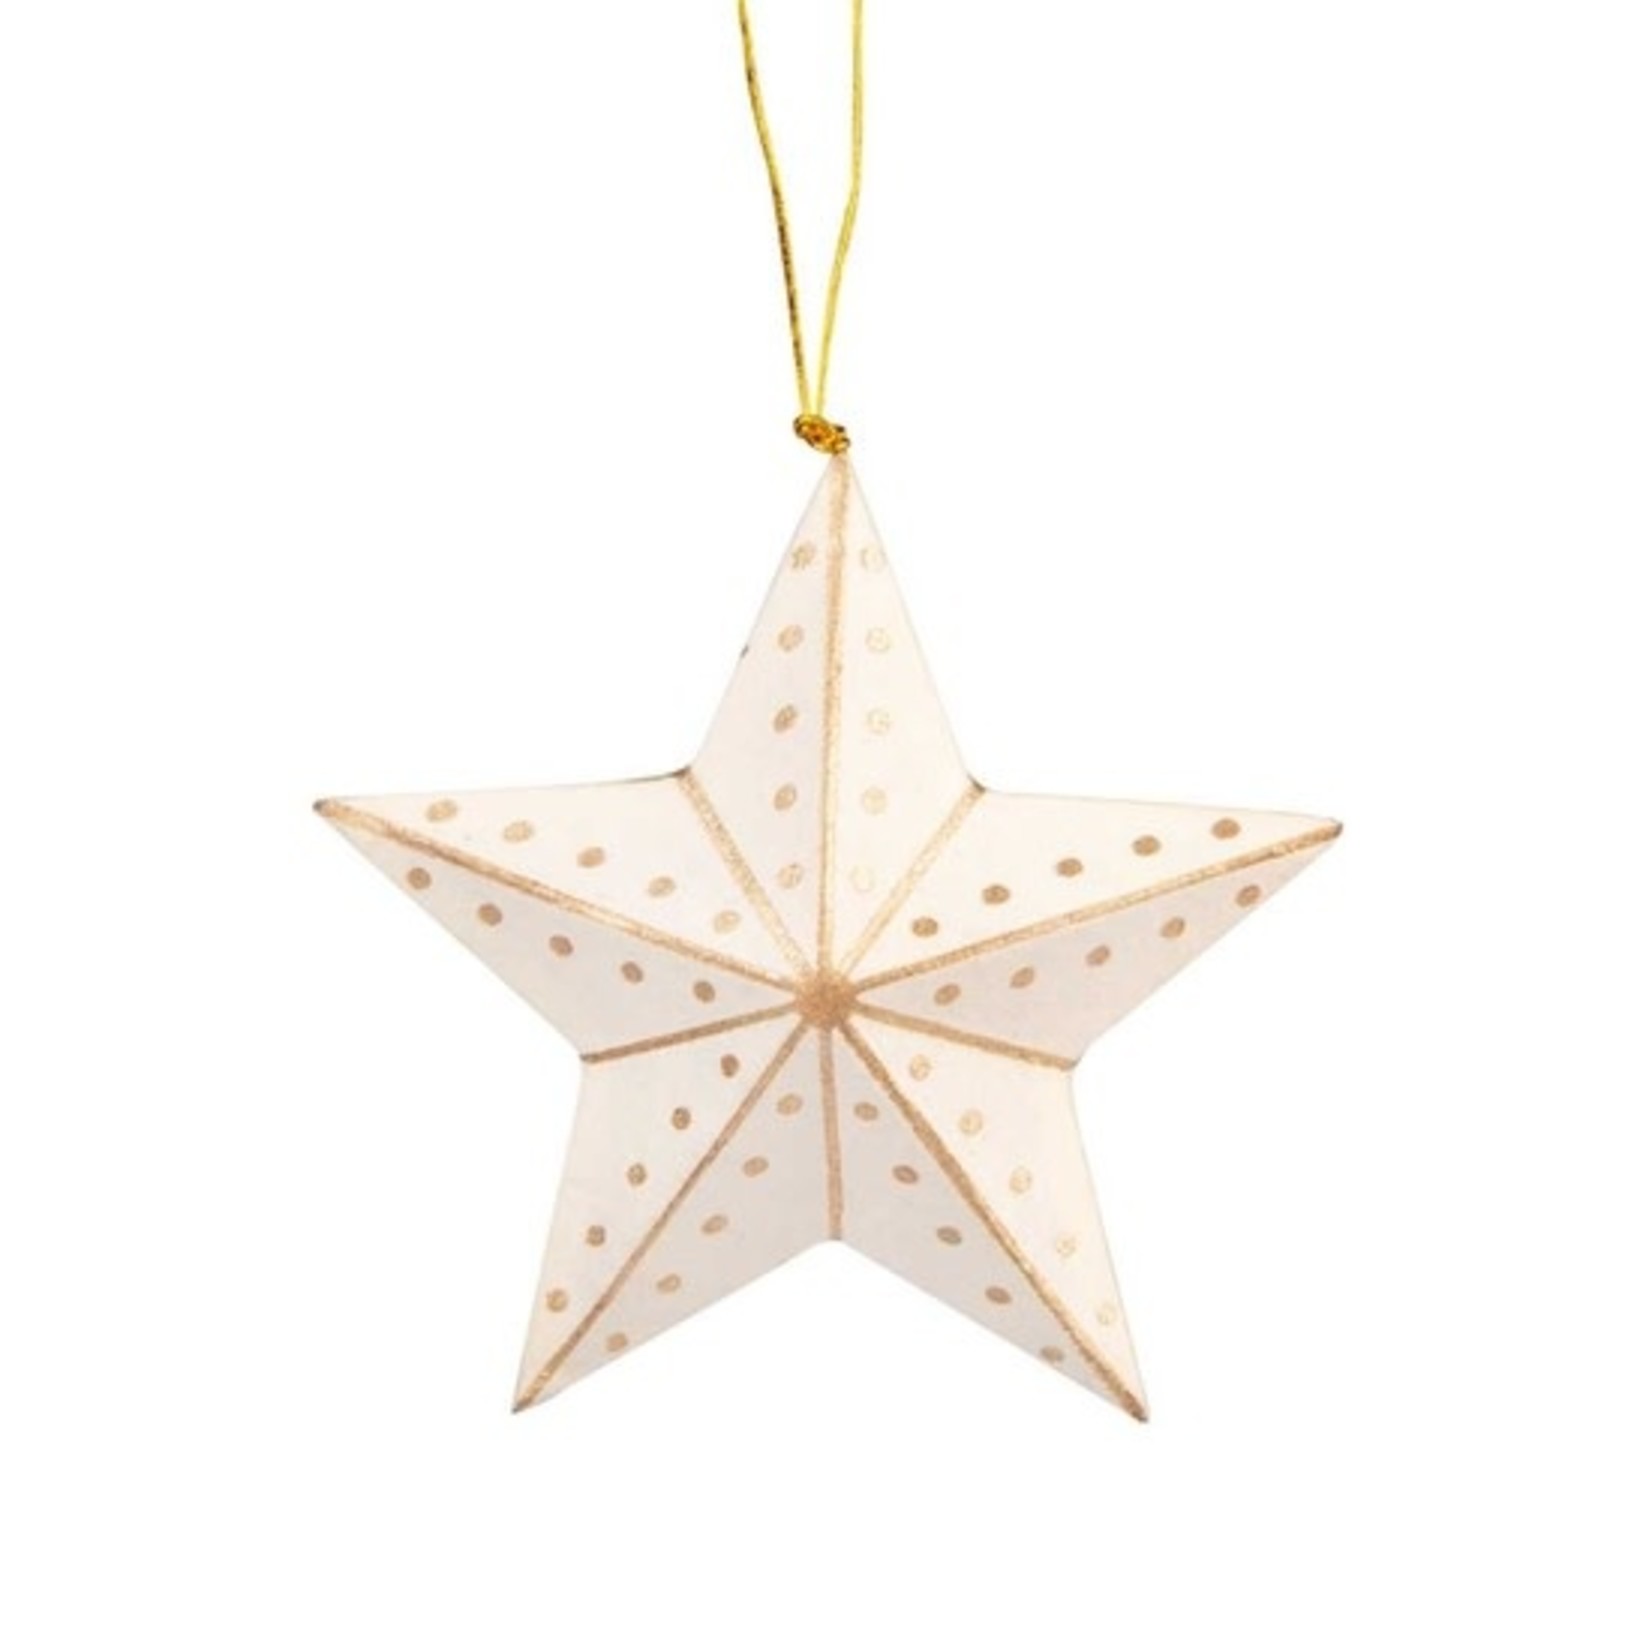 Ten Thousand Villages Gold and White Star Ornament, Bangladesh